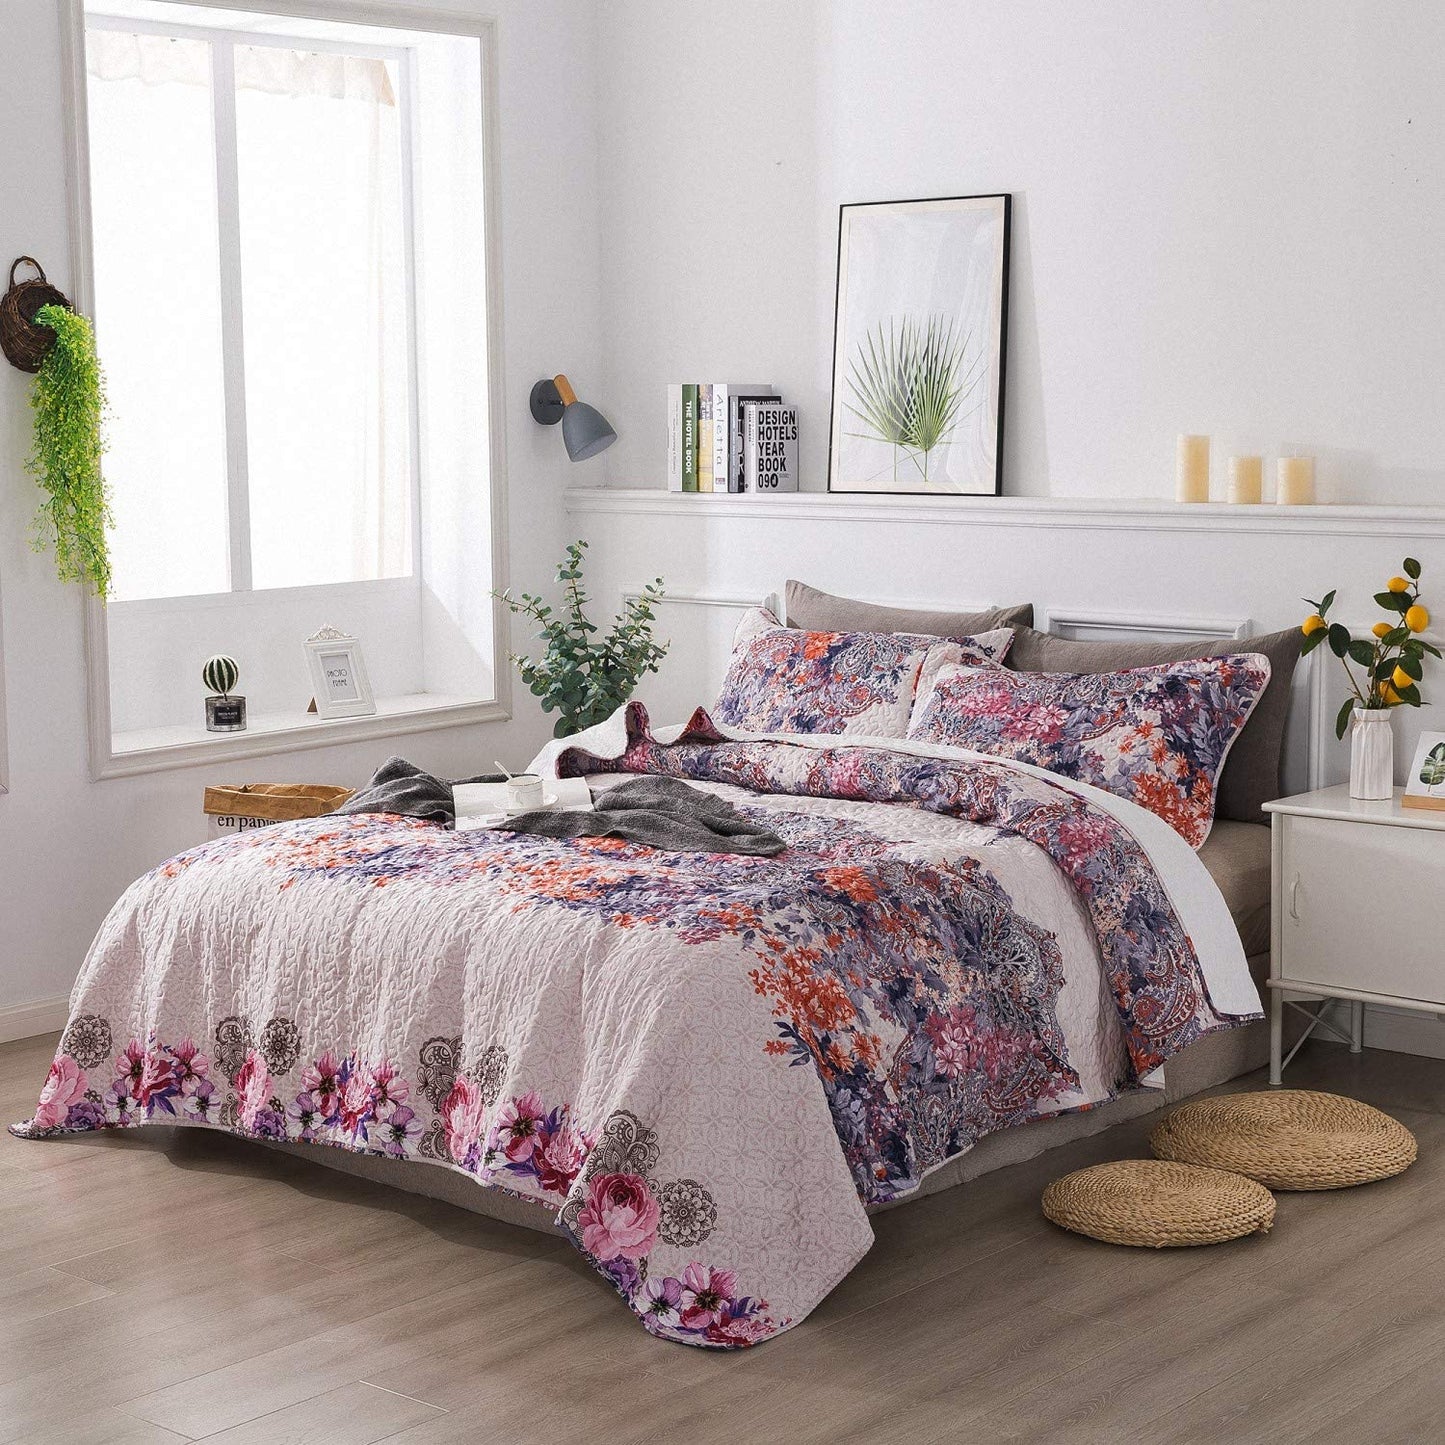 Microfiber Reversible Quilt,Sham in Colorful Vector Floral Pattern